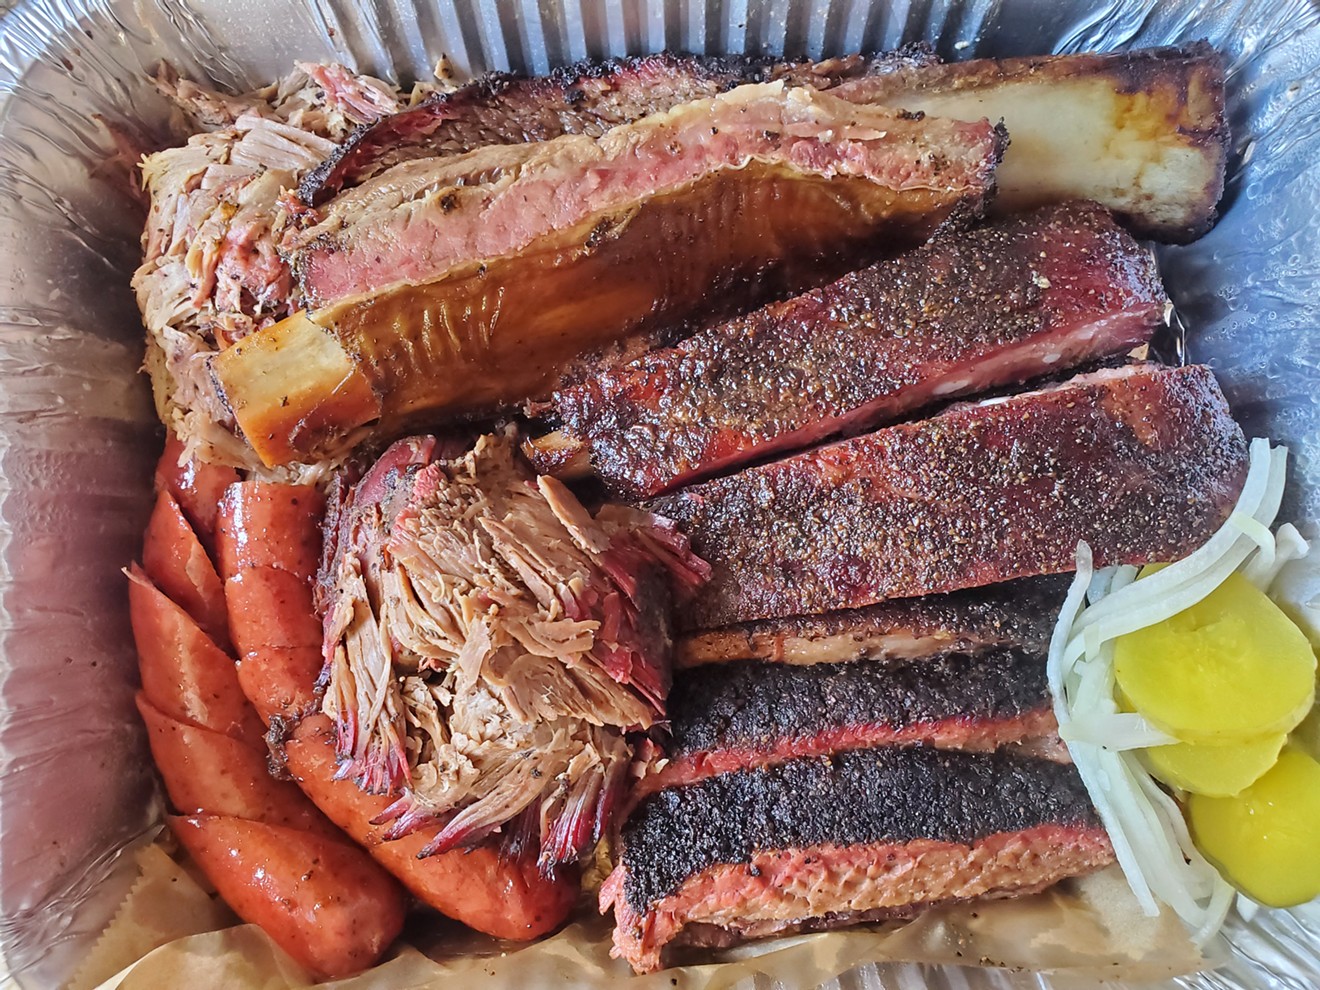 Load up on smoked meats from Plates by the Pound while you still can.